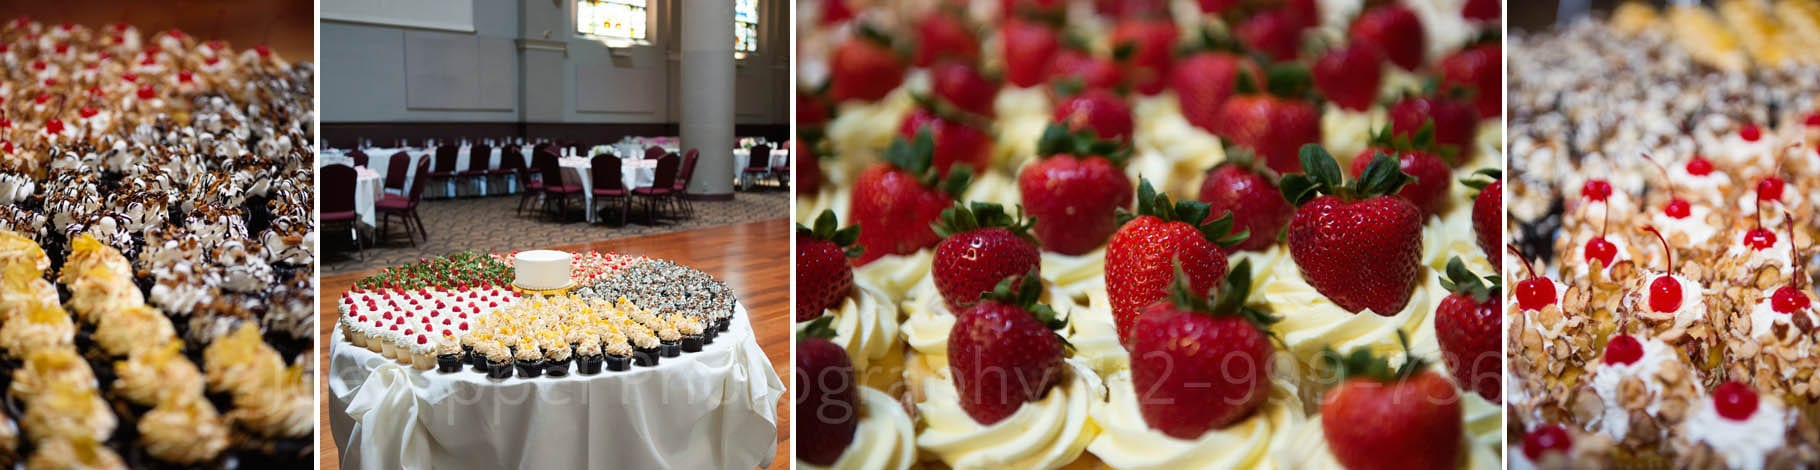 Four photos of cupcakes at a wedding: cupcakes with chocolate and nuts on top; a table filled with different kinds of cupcakes; cupcakes with white icing and a strawberry on top; white iced cupcakes with candied shaved almonds and a cherry on top.